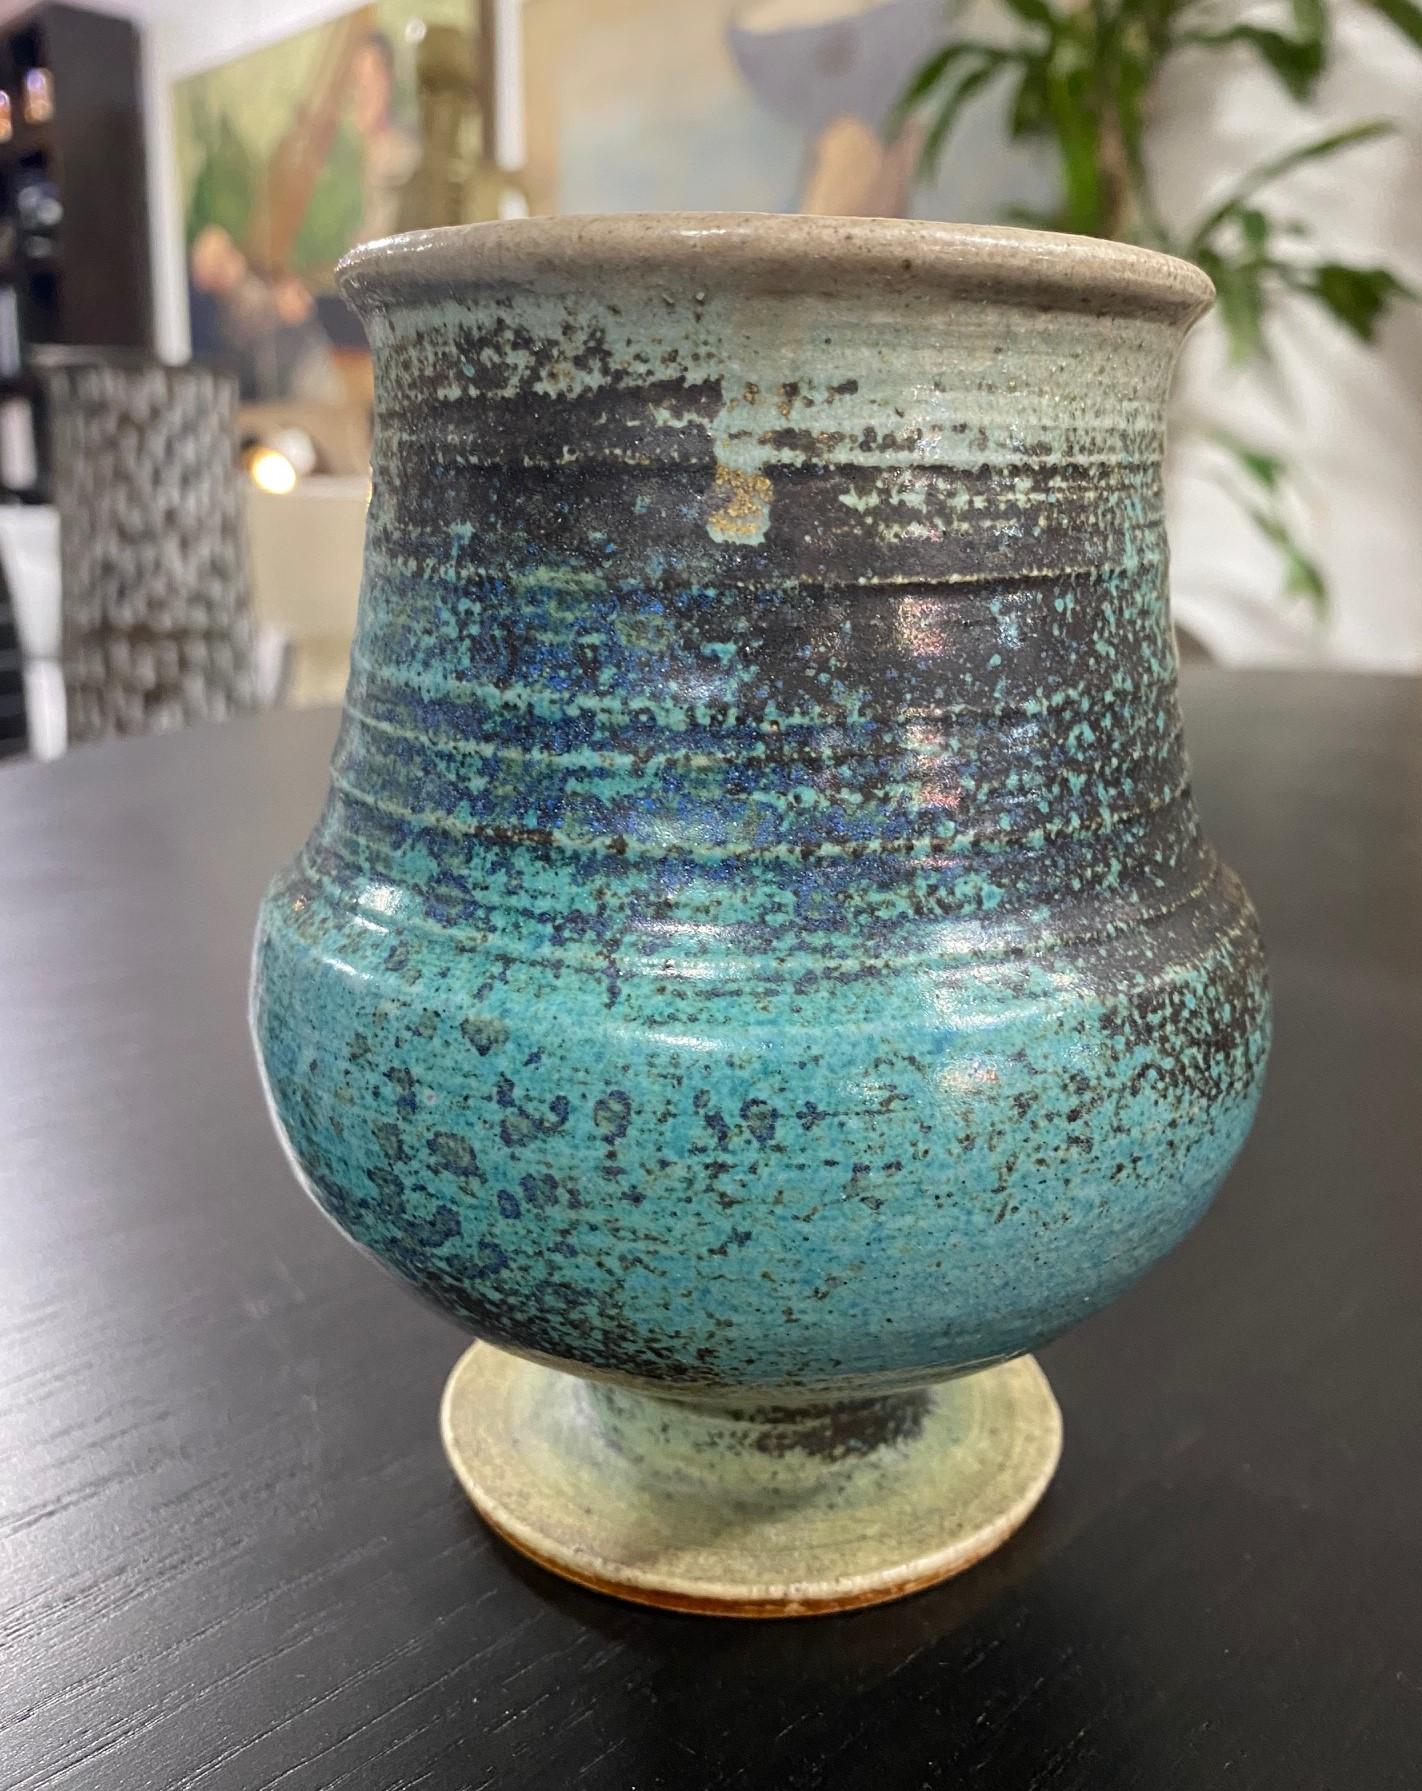 A wonderful Scandanavian glazed stoneware pottery footed vase by Annikki Hovisaari for Arabia Finland. This piece features a sea-like turquoise/ blue glaze and gourd-like shape. 

Hovisaari began work at Arabia Finland in the early 1950s. Her work